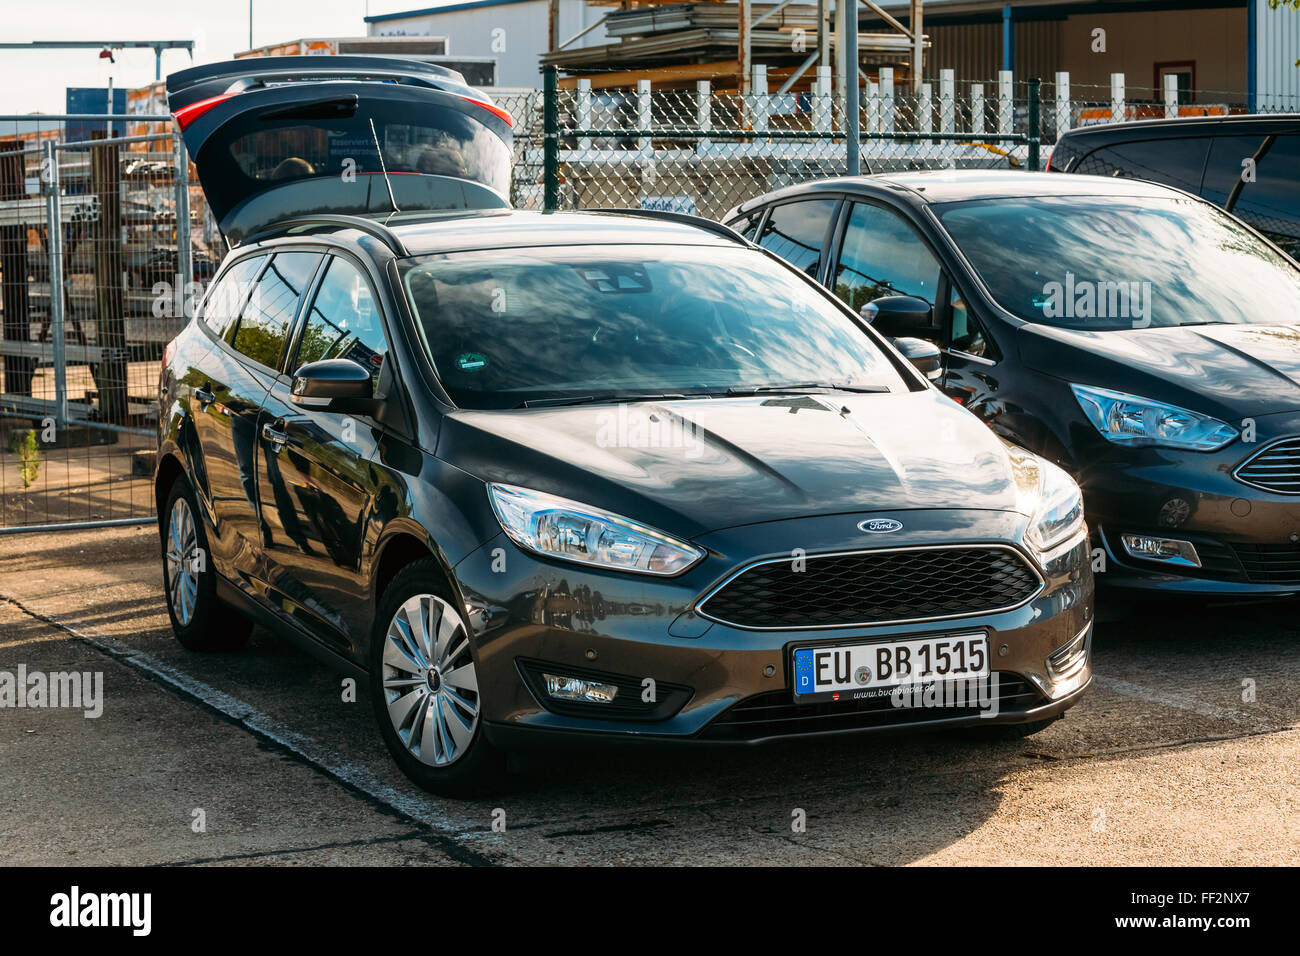 FRANKFURT-HAHN,  GERMANY - JUNE 16, 2016: The Ford Focus car with an open trunk standing in the parking lot. Stock Photo